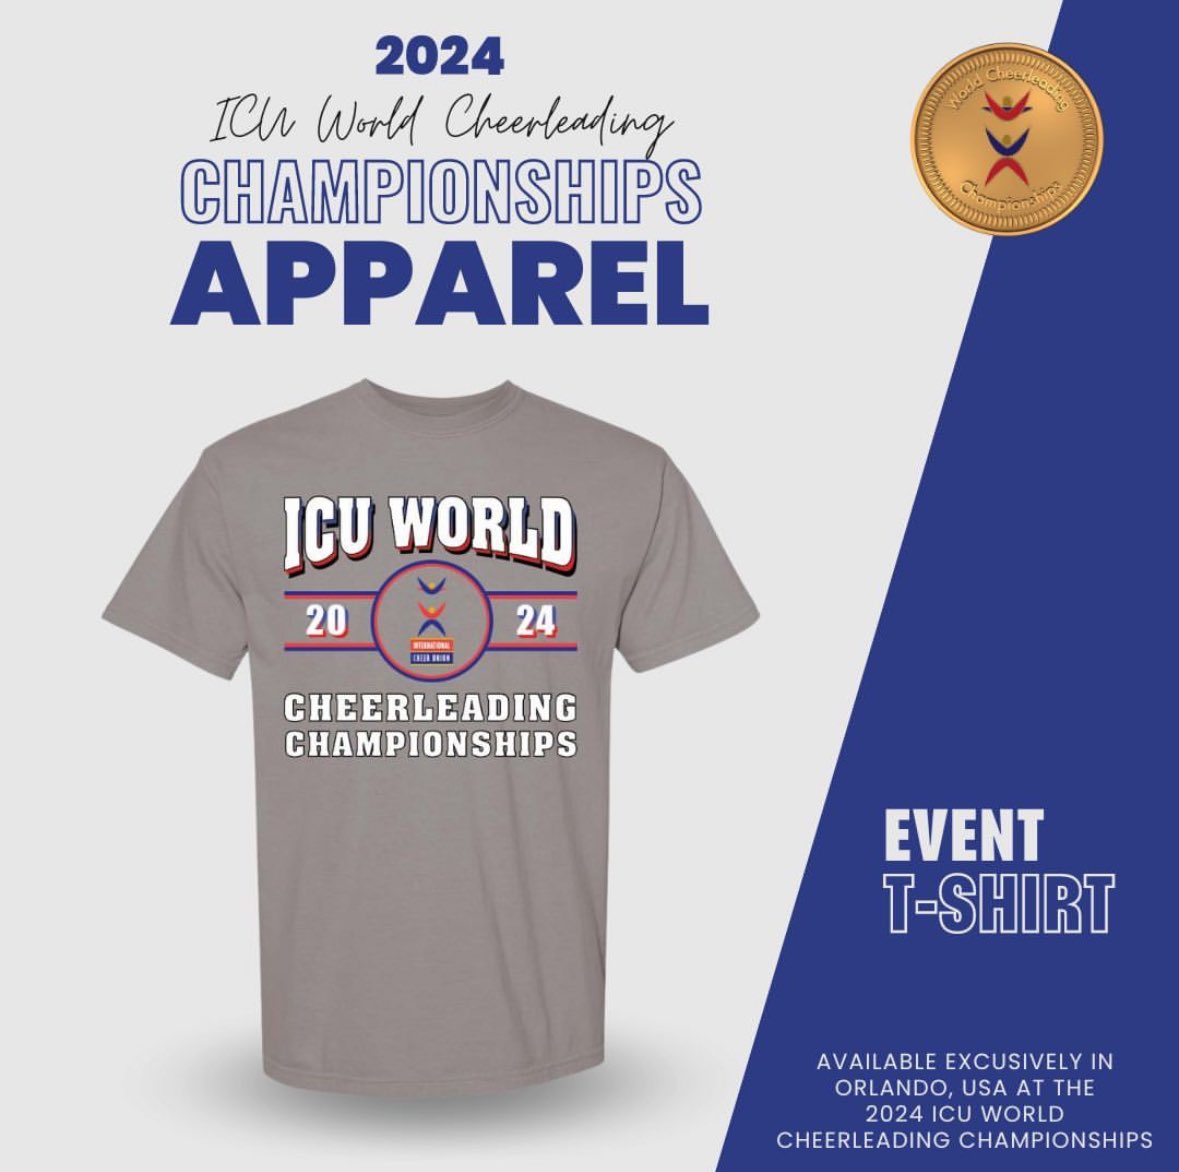 It's time for our 2024 ICU Championships Apparel Reveals✨️ First up in the 2024 ICU World Championships Apparel Reveal is the 2024 Event Championships T-shirt 👕 Stay tuned for the rest of the apparel items that will be available exclusively in Orlando at the Championships!